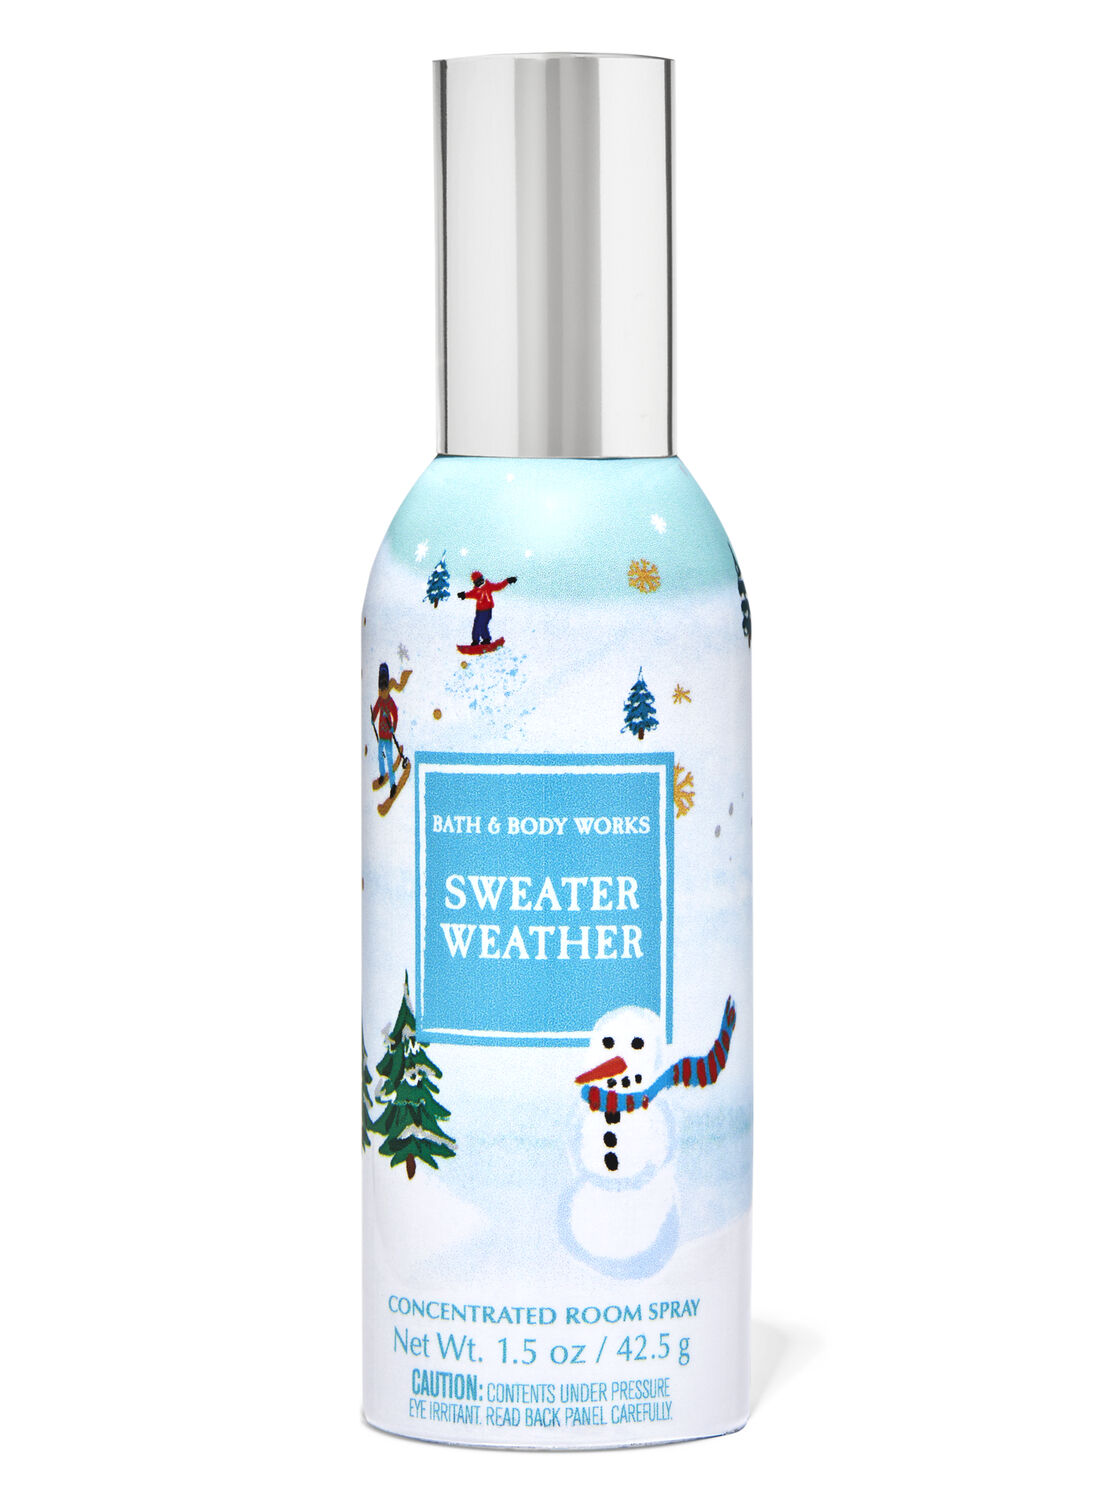 Sweater Weather Concentrated Room Spray